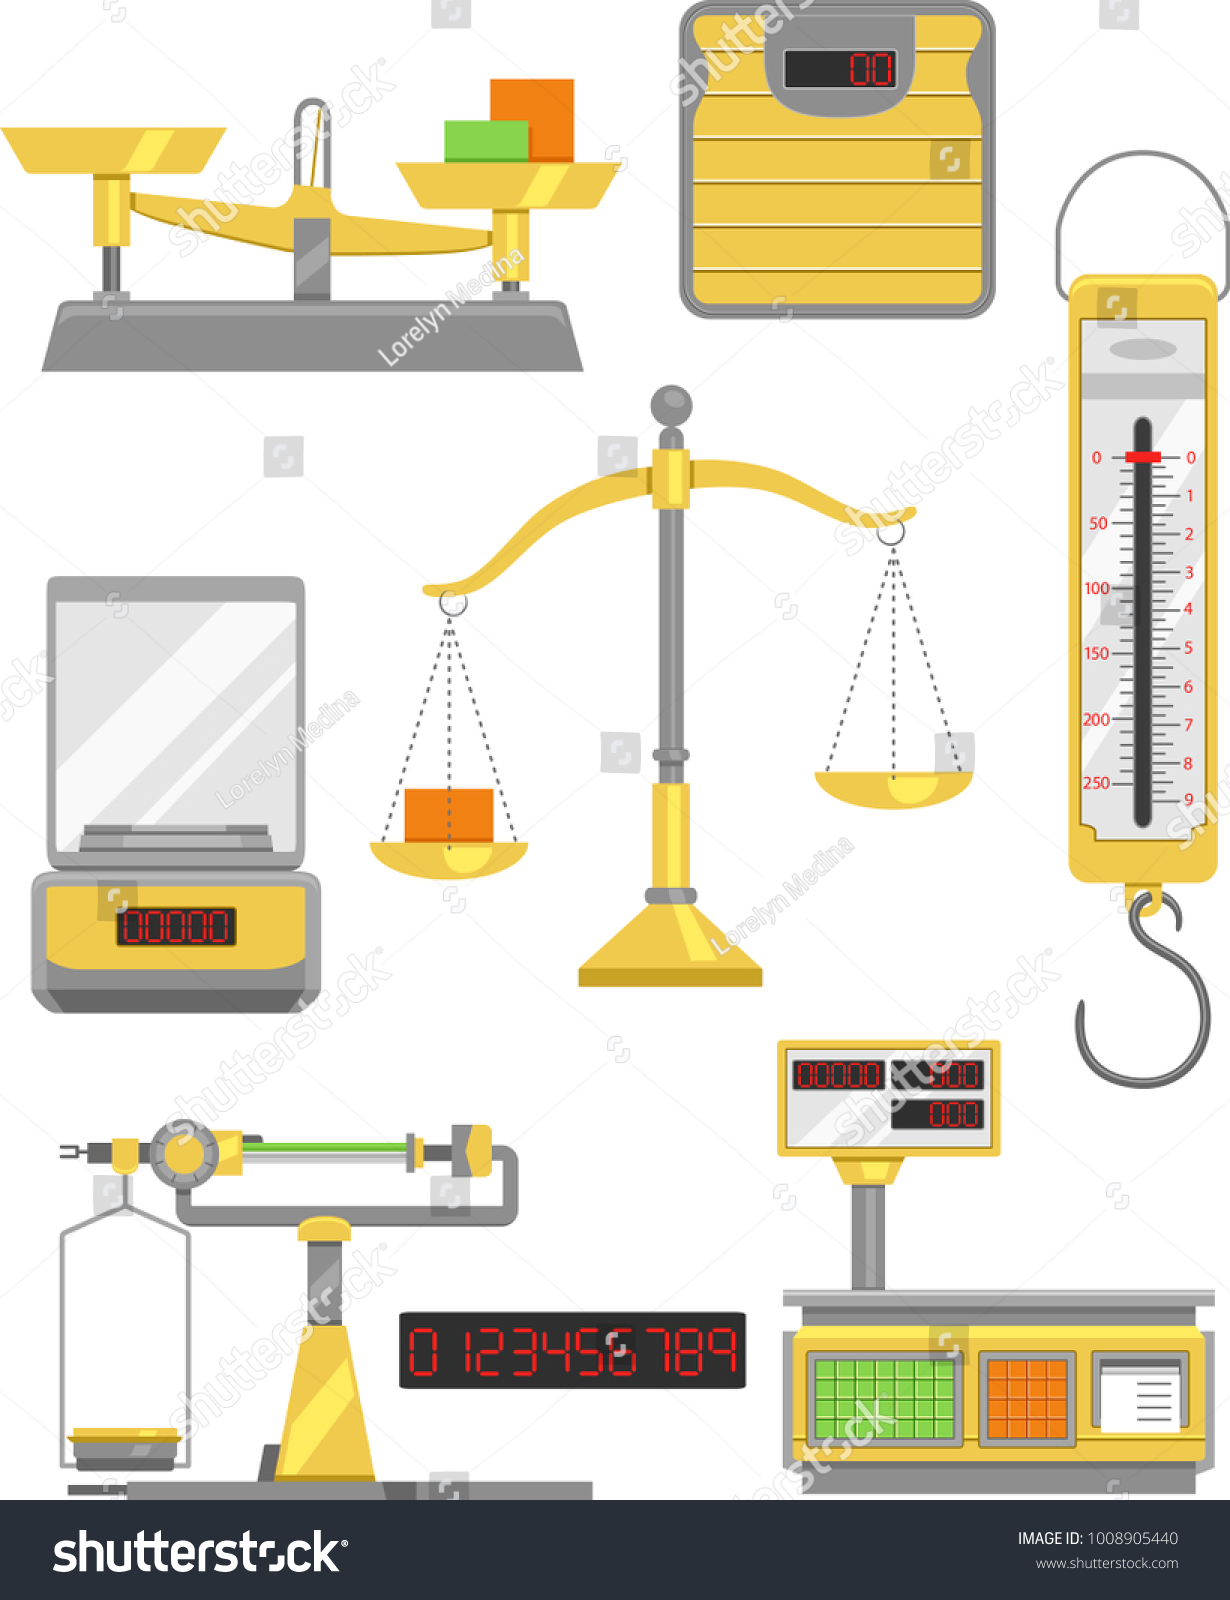 What Equipment Is Used To Measure Mass